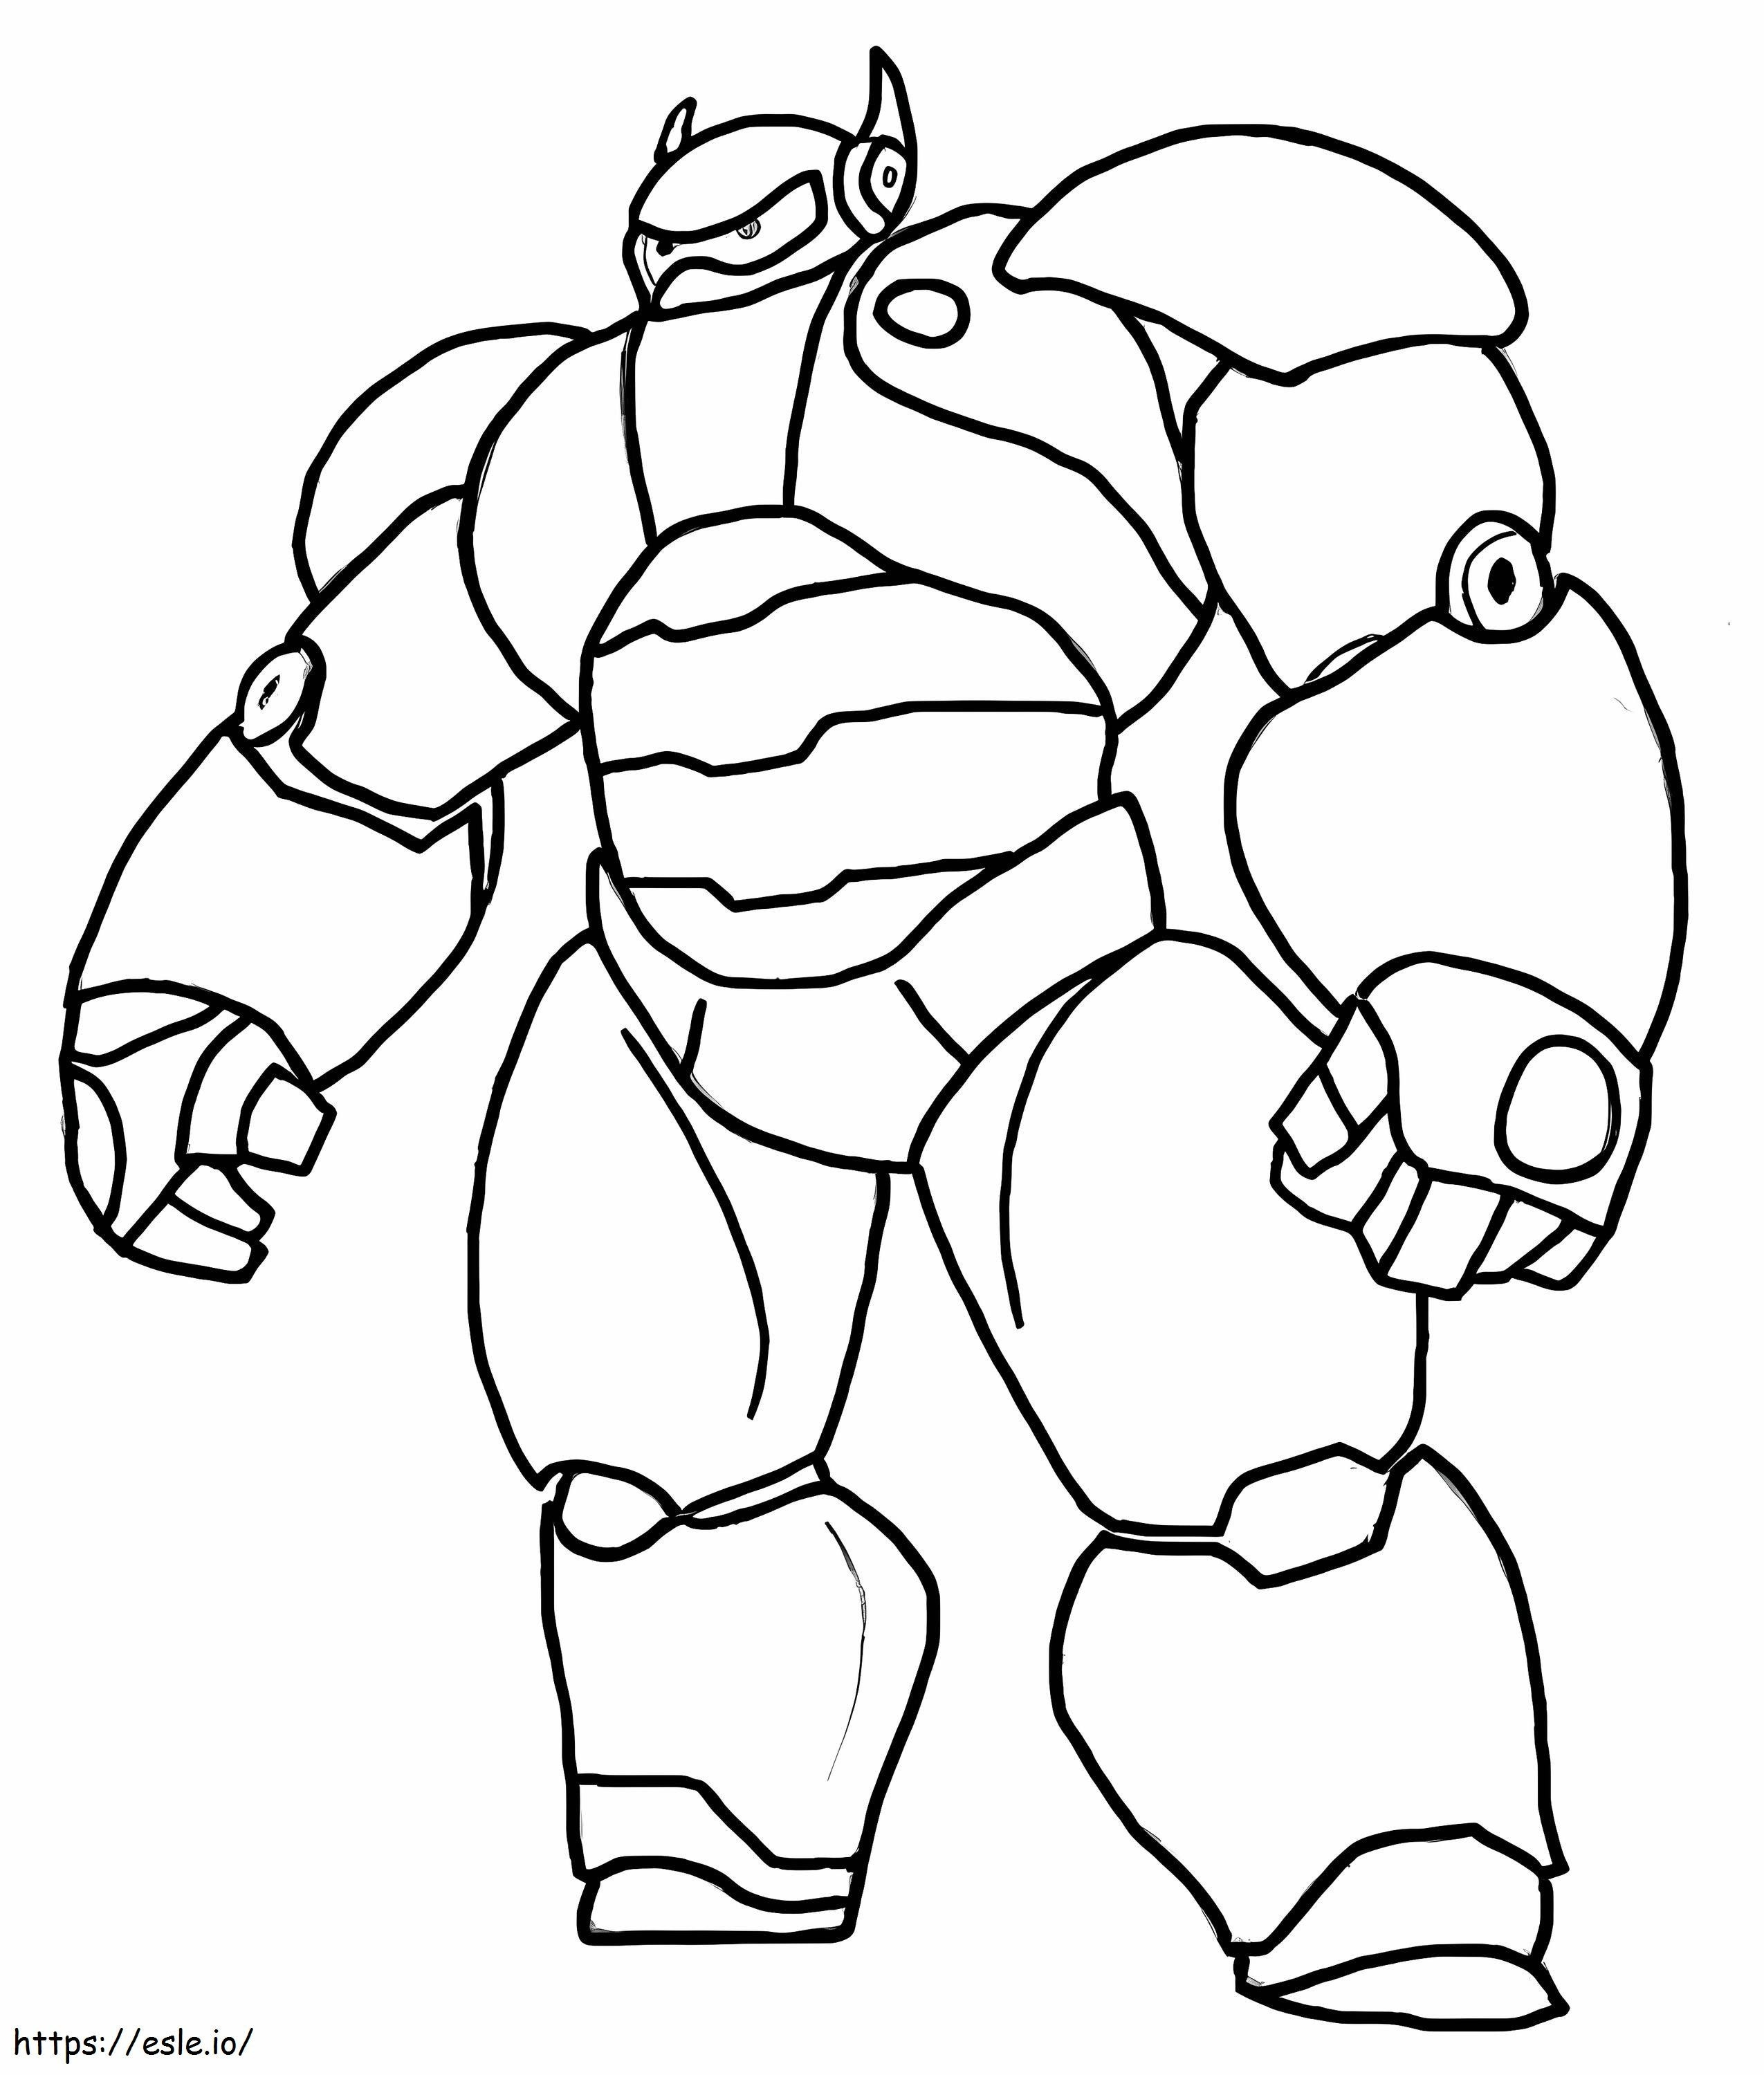 Chico Robot Baymax coloring page